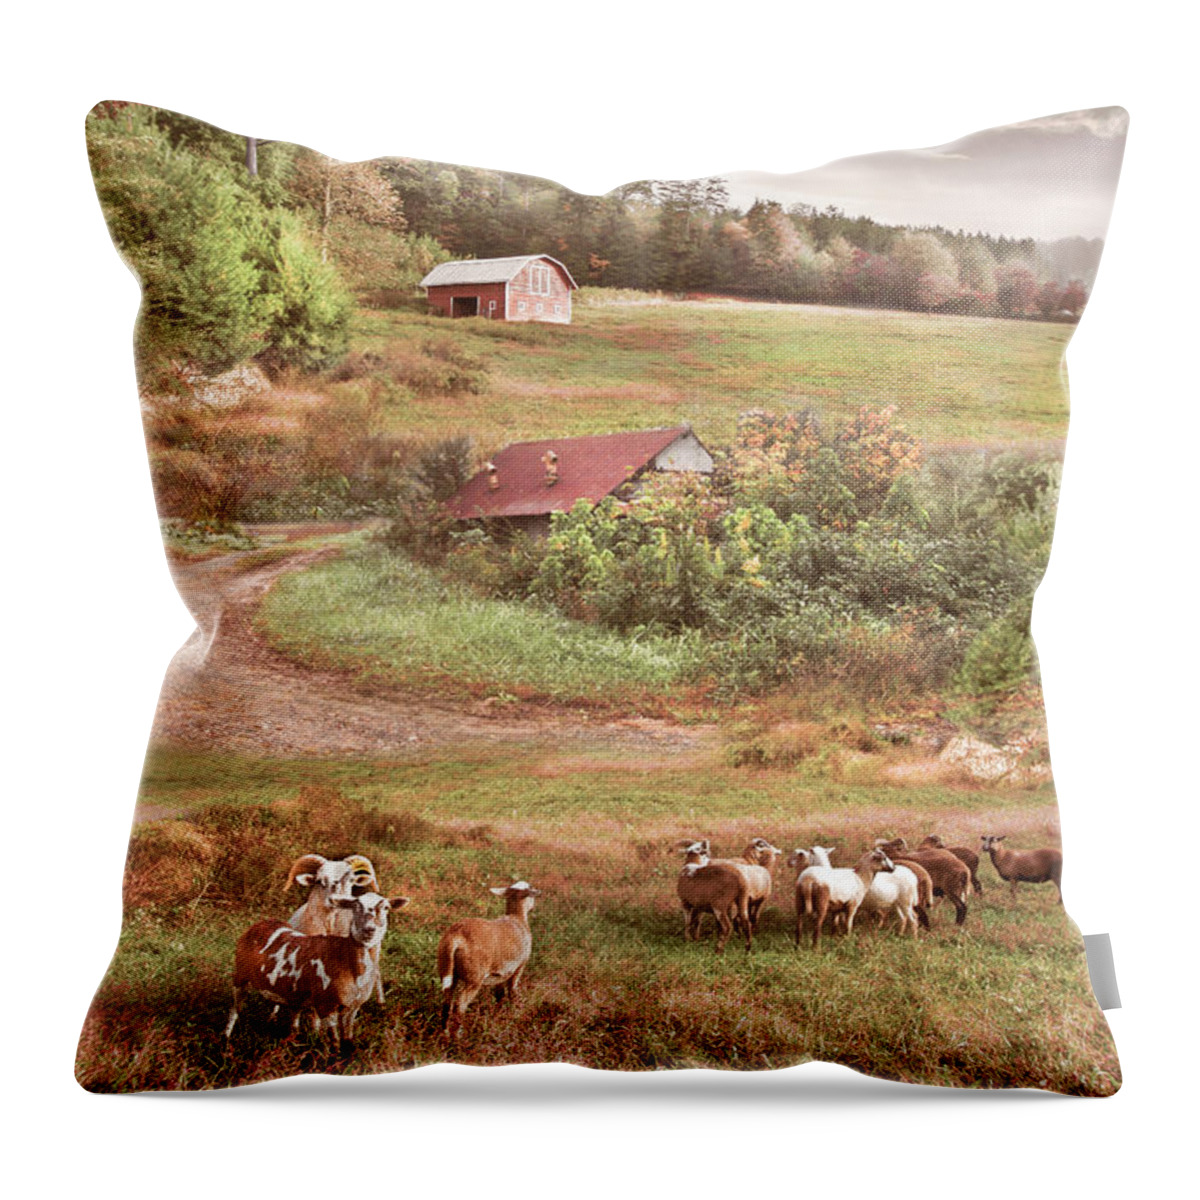 Animals Throw Pillow featuring the photograph Sheep on the Country Farm by Debra and Dave Vanderlaan